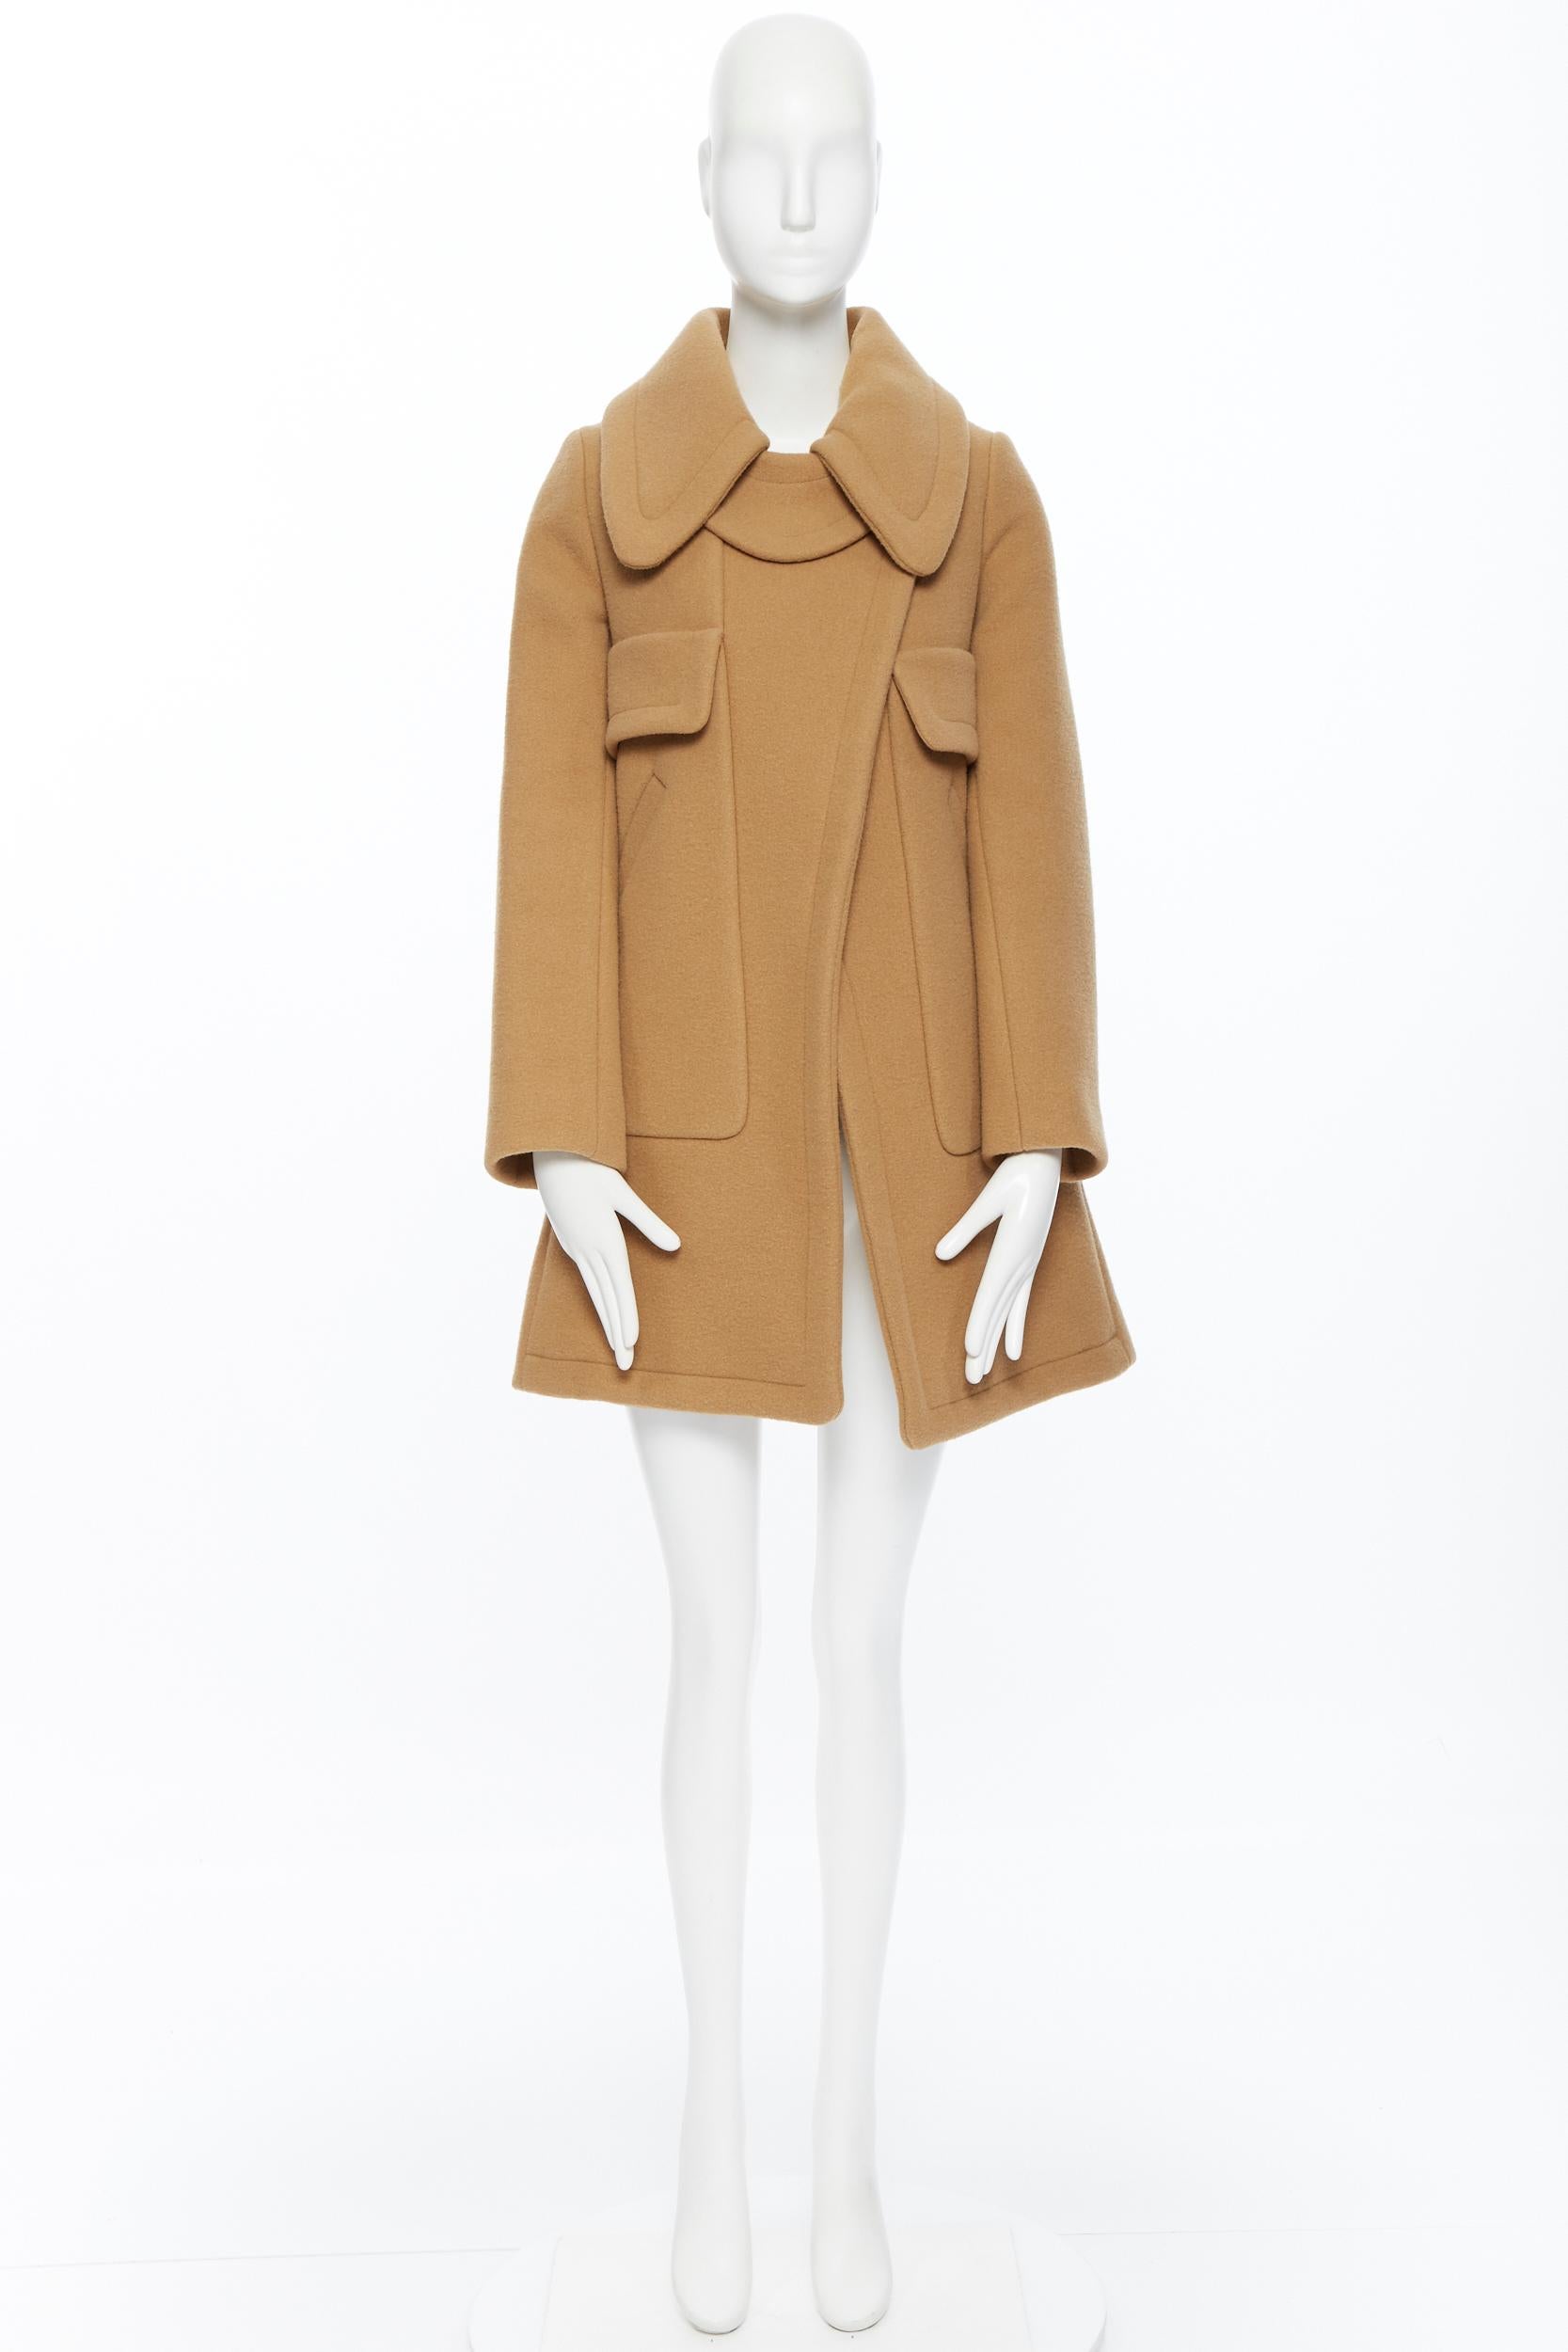 CHLOE camel beige brown thick wool felt wide collar structured winter coat S
Brand: Chloe
Model Name / Style: Wool coat
Material: Wool
Color: Beige
Pattern: Solid
Closure: Button
Extra Detail: Partially lined. Box pleat vent at back. Long Sleeve.